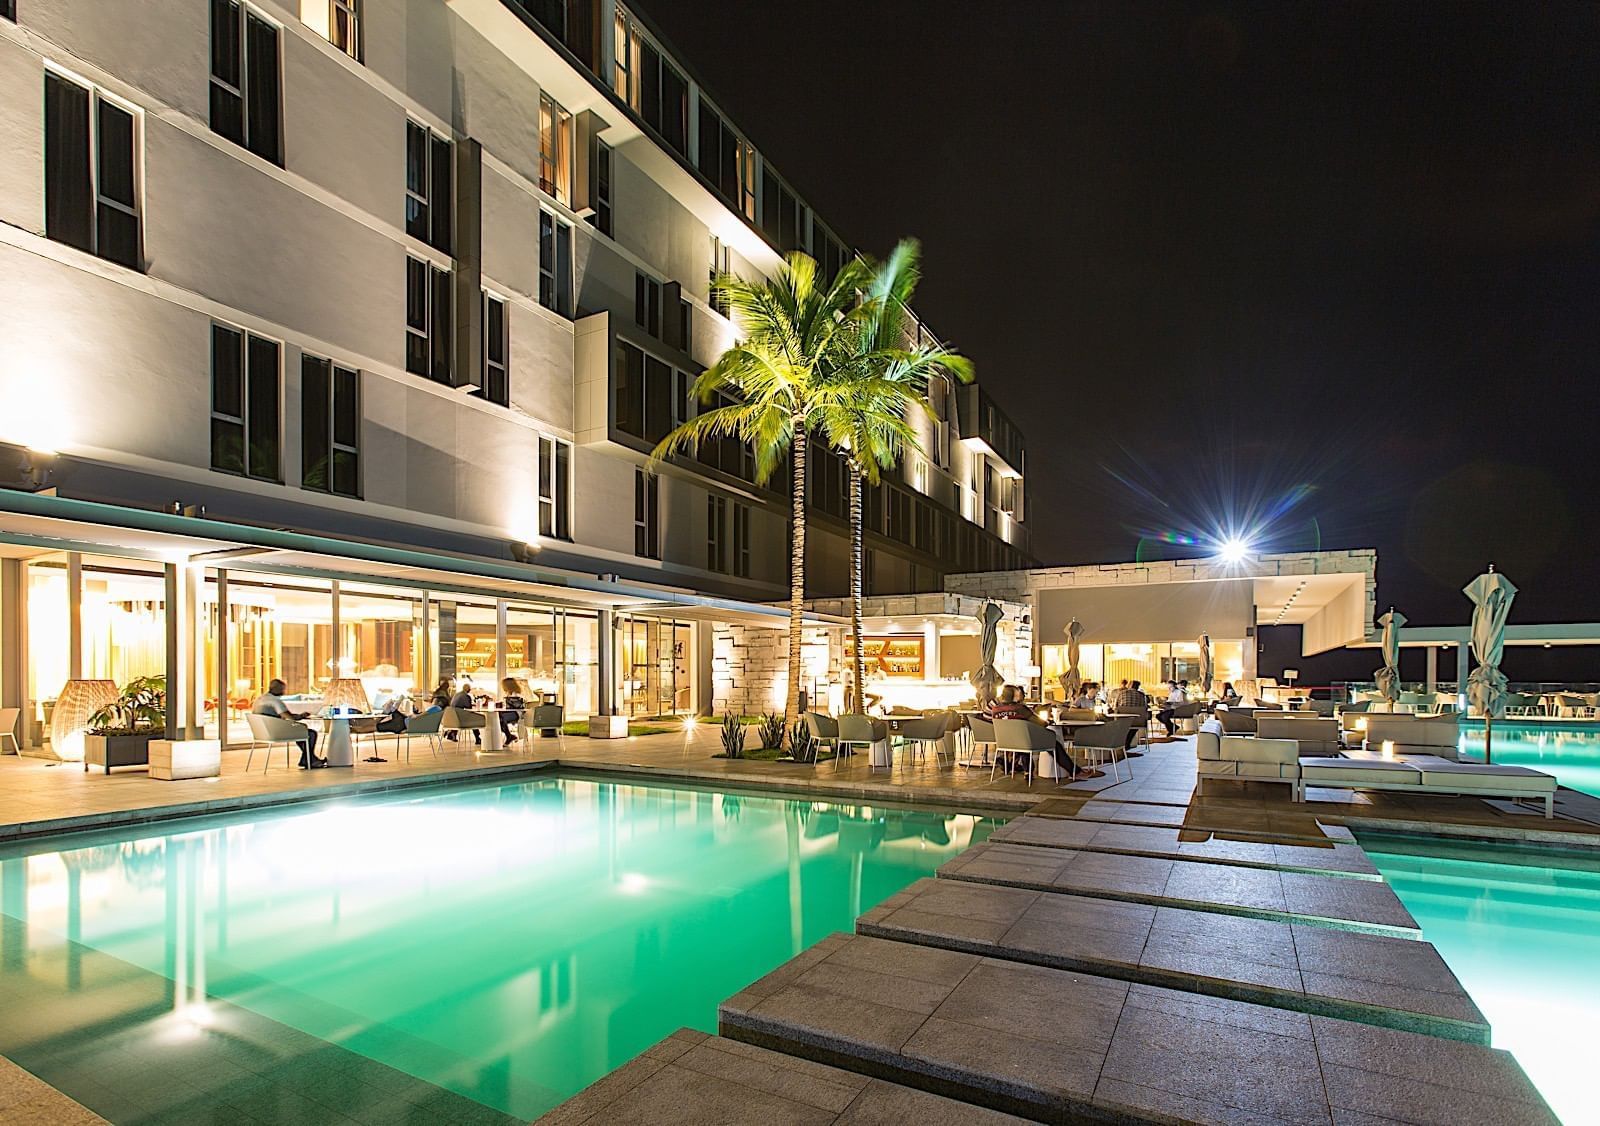 Pool at Noom Hotel Conakry by night